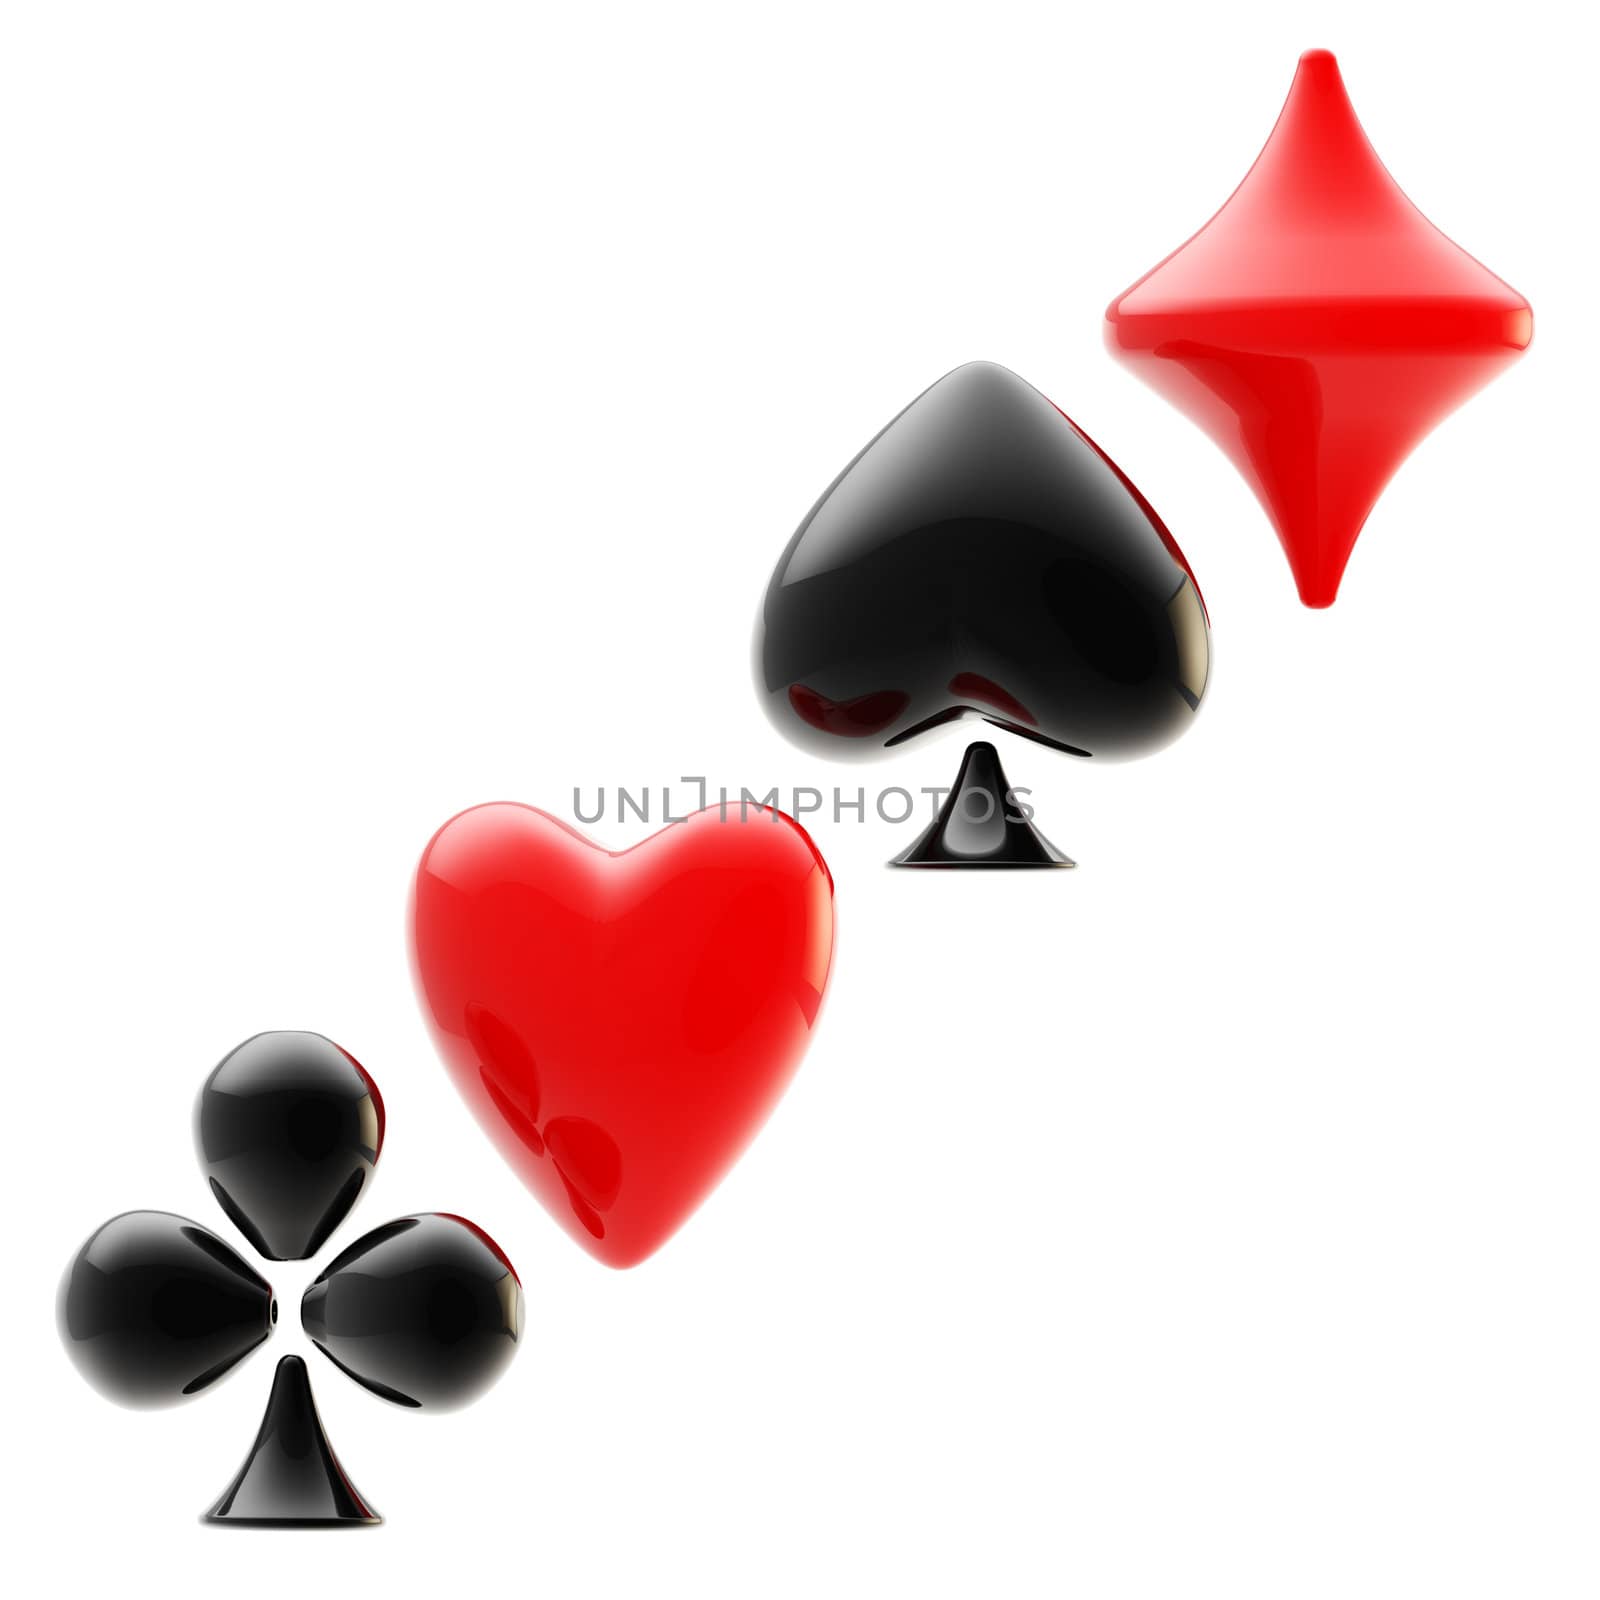 Gambling emblem made of playing card suits by nbvf